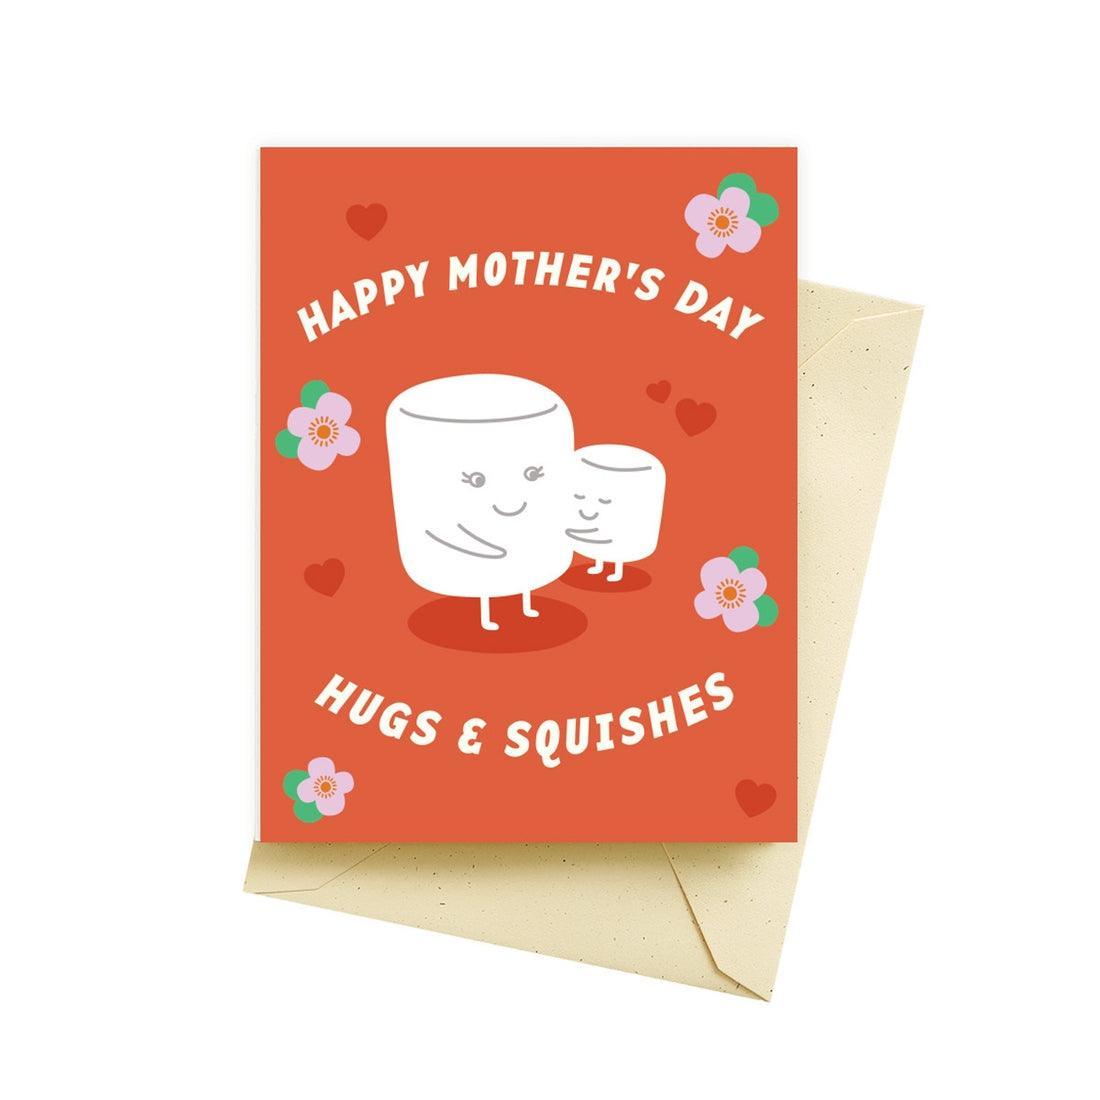 Hugs Squishes Mother's Day Cards - Seltzer - The Sock Monster